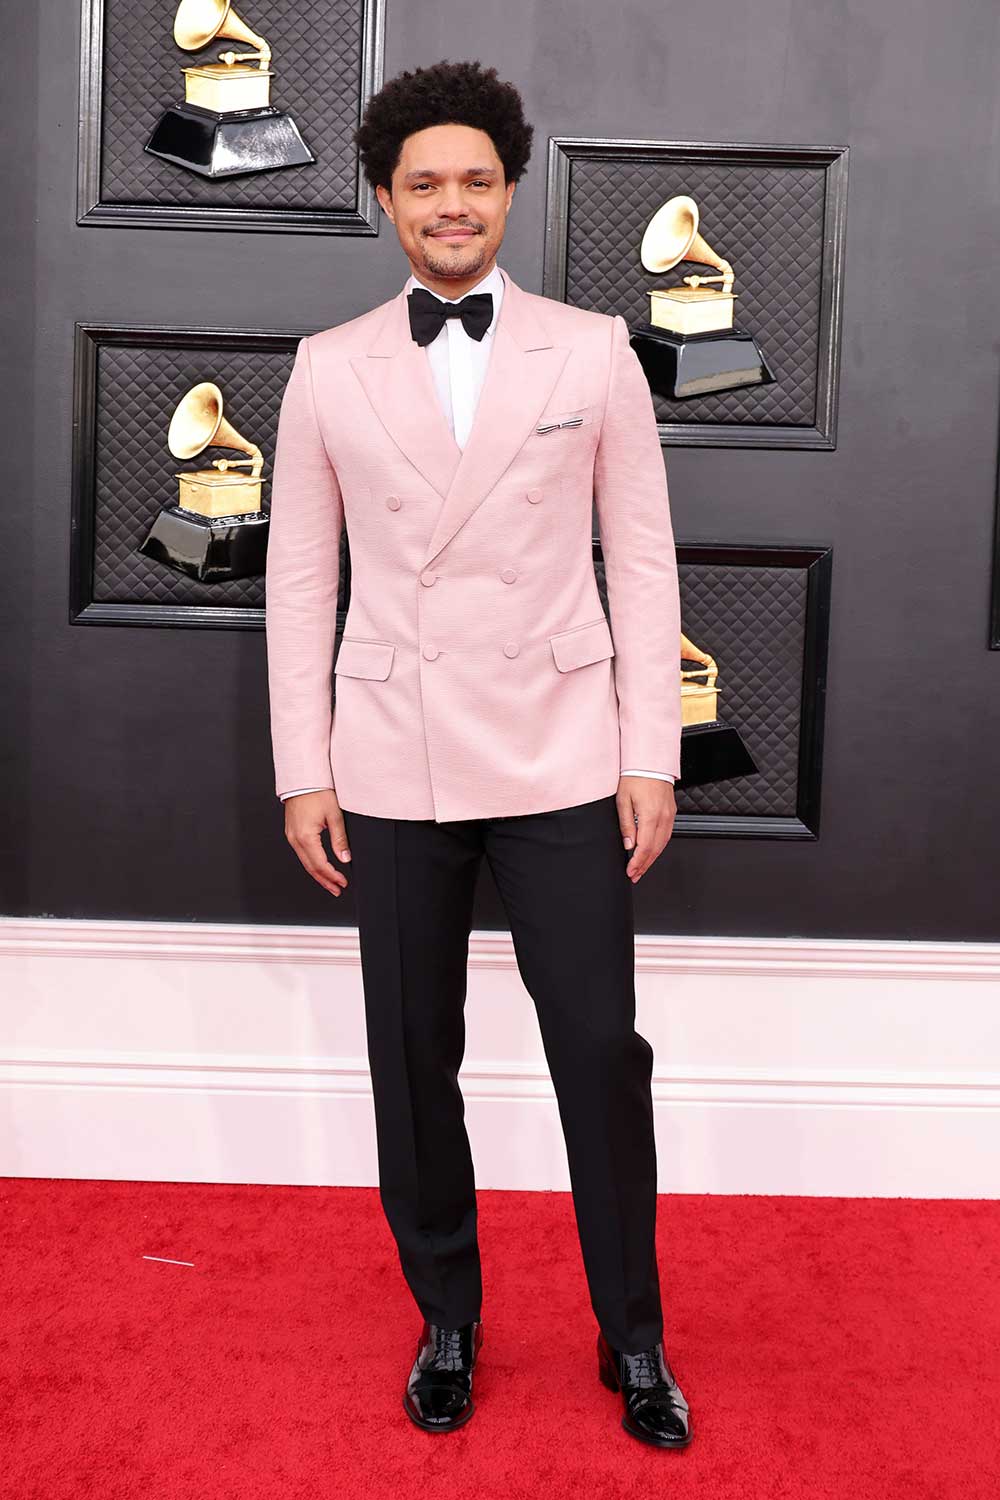 Trevor Noah wearing a pink Gucci tuxedo jacket at the 2022 Grammy Awards Red Carpet